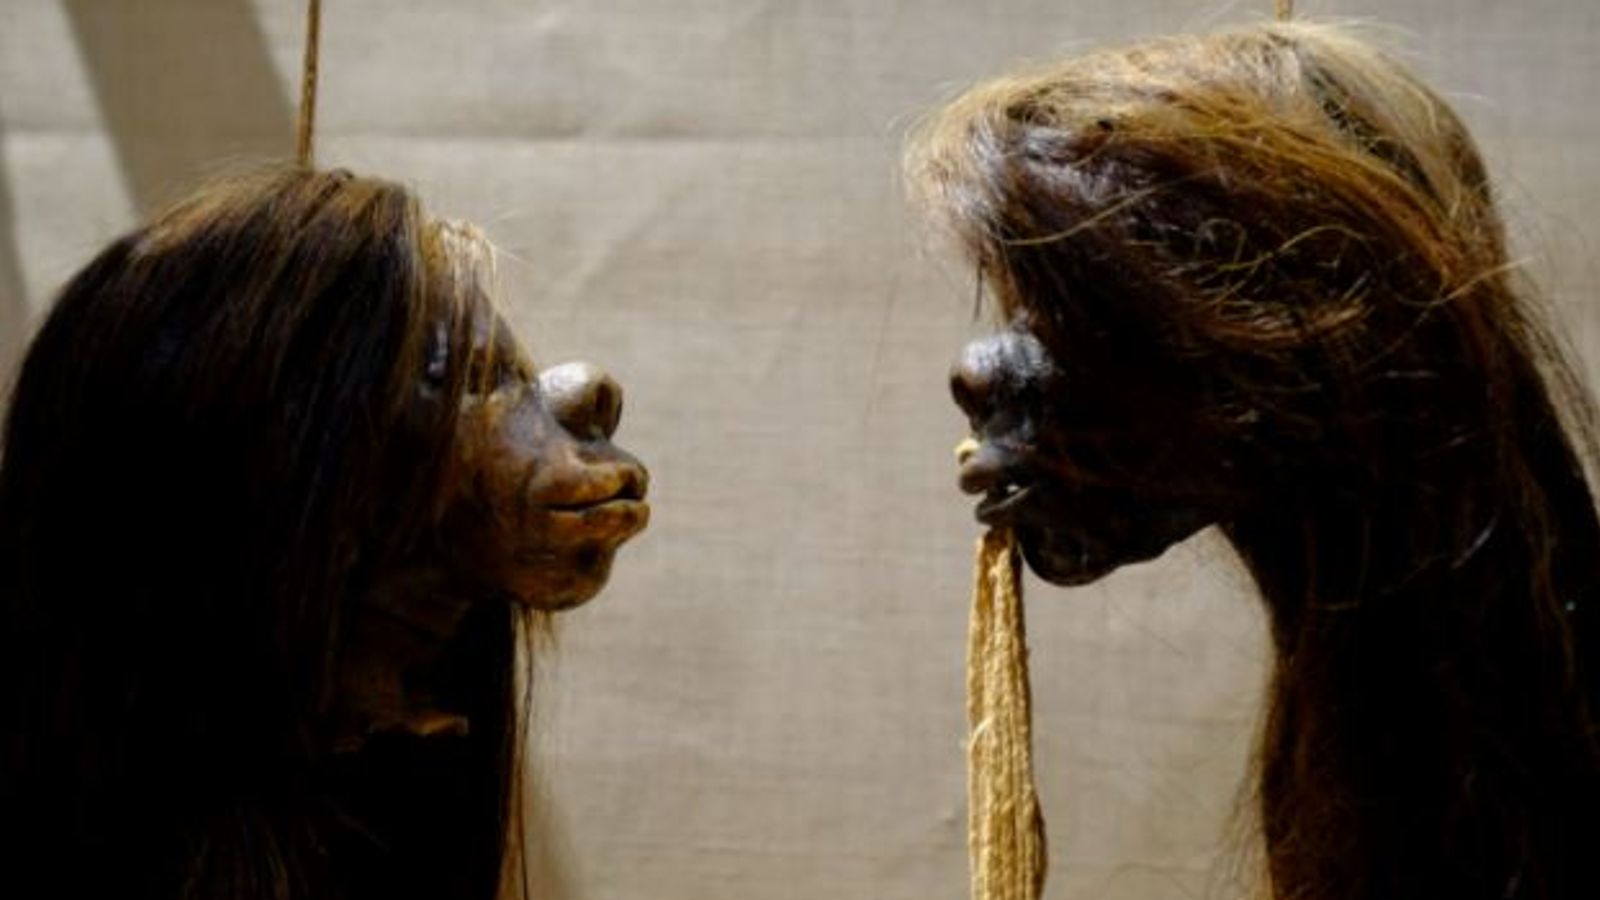 Shrunken Heads Removed From Display As Museum Seeks To Decolonise